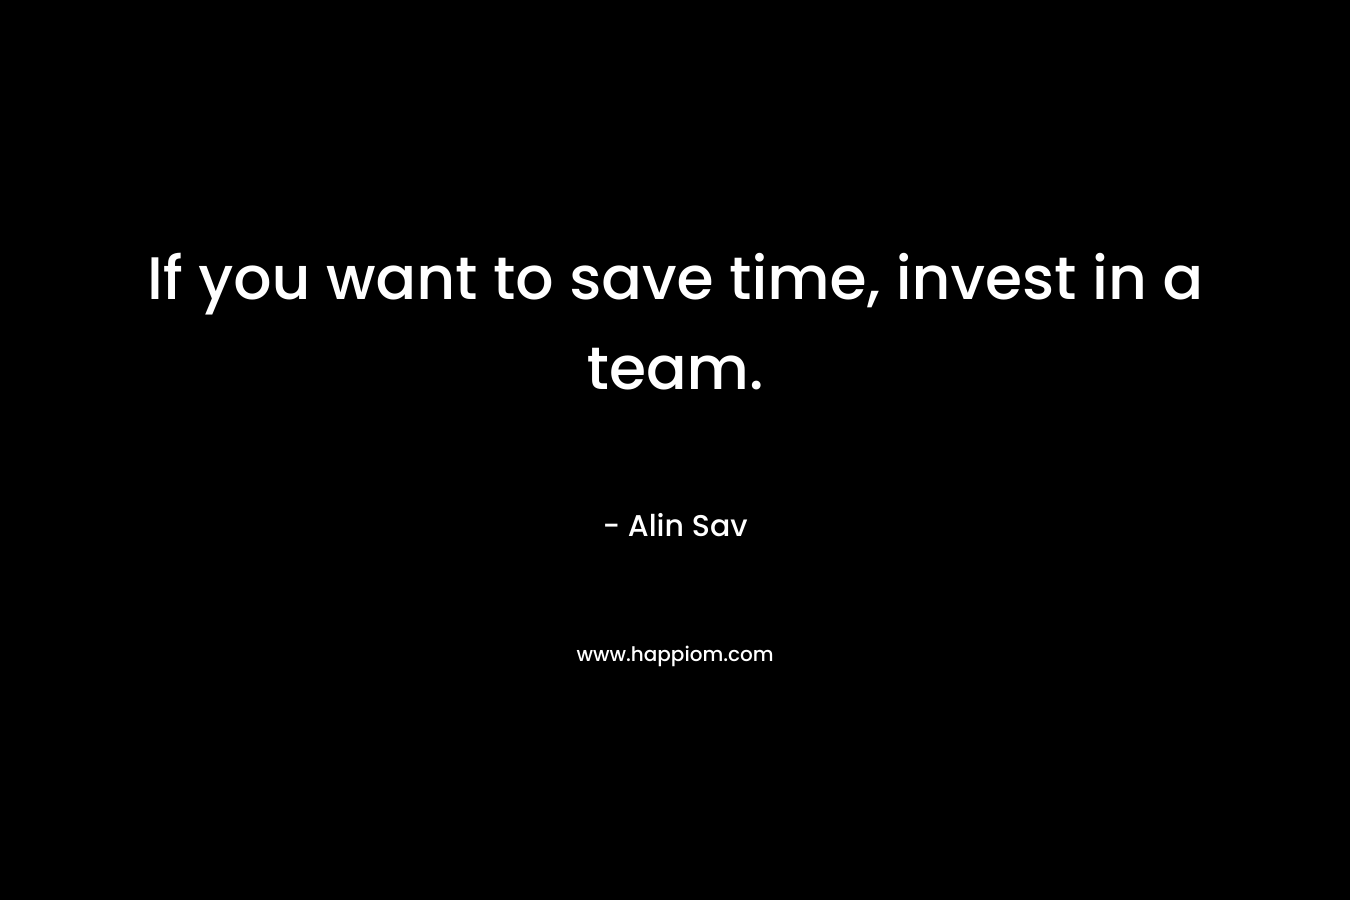 If you want to save time, invest in a team.